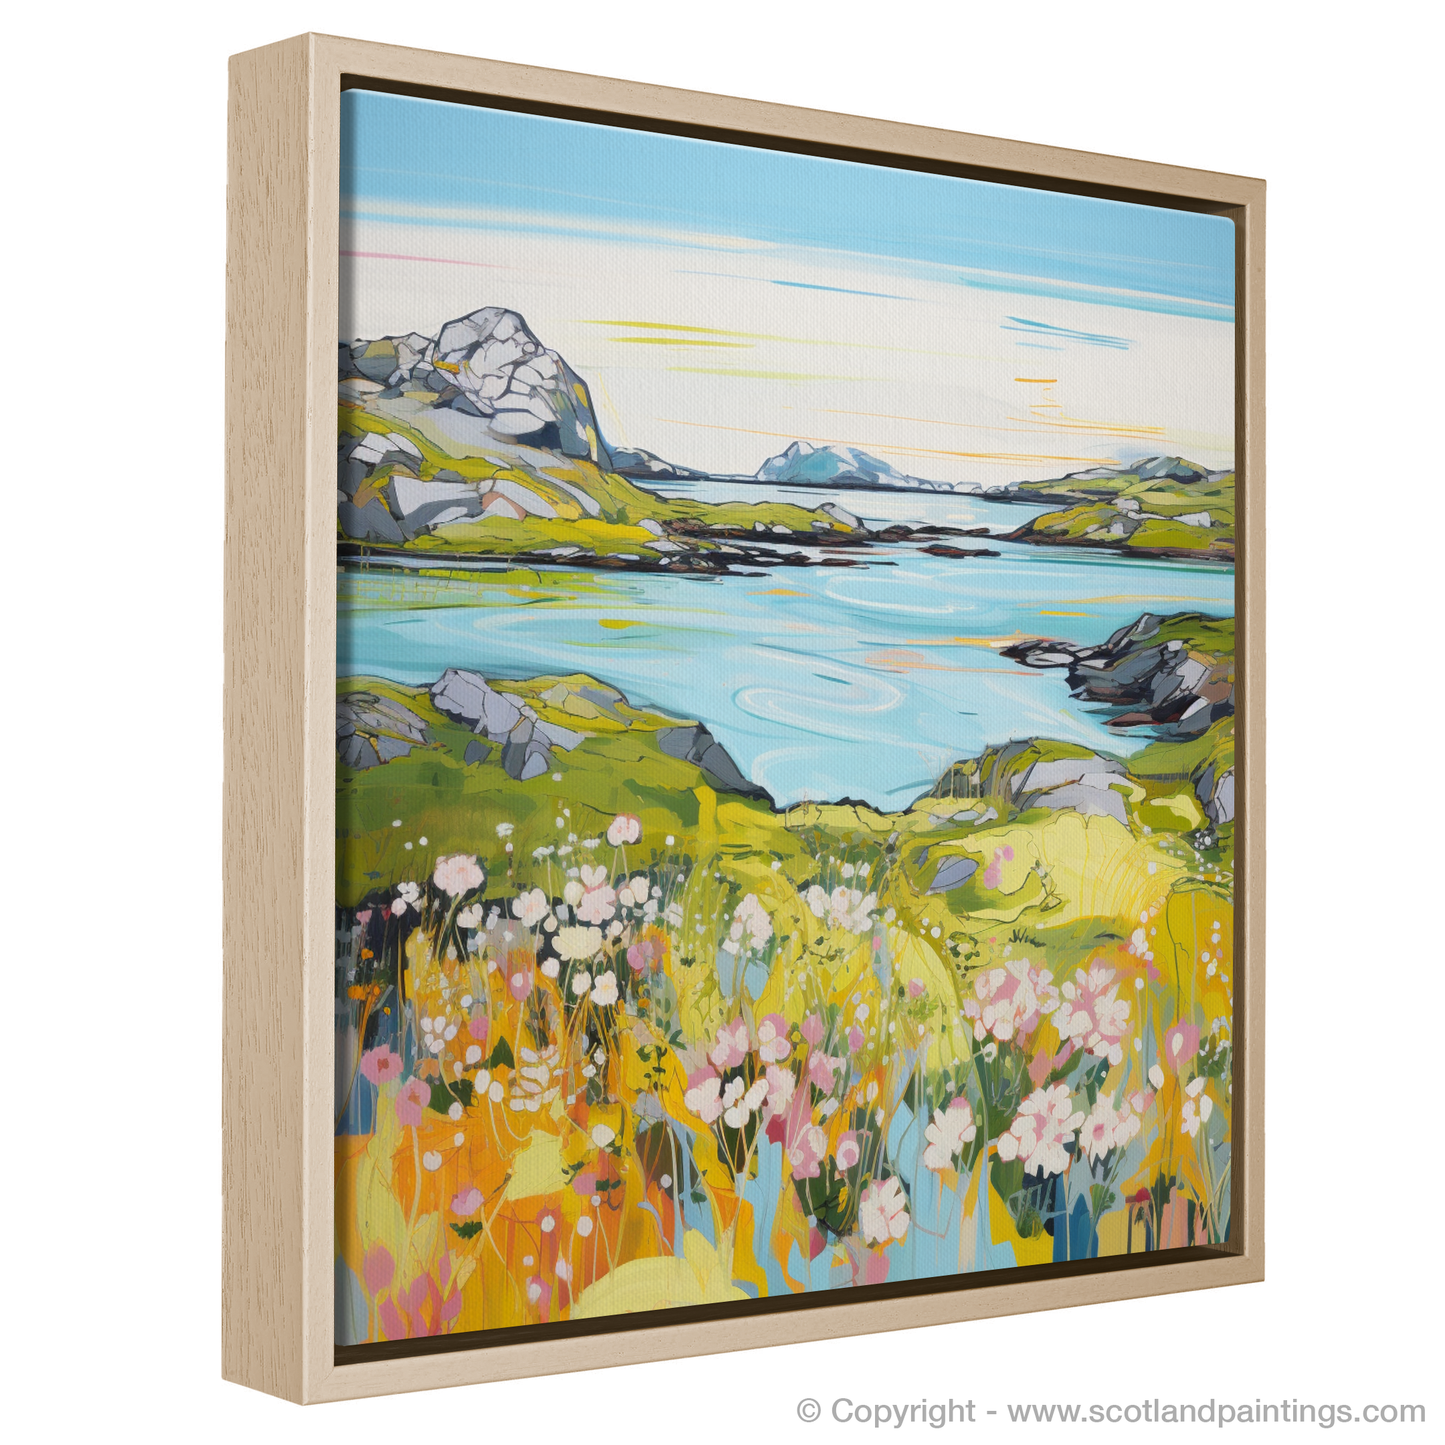 Painting and Art Print of Isle of Scalpay, Outer Hebrides in summer entitled "Summer Splendour of the Isle of Scalpay".